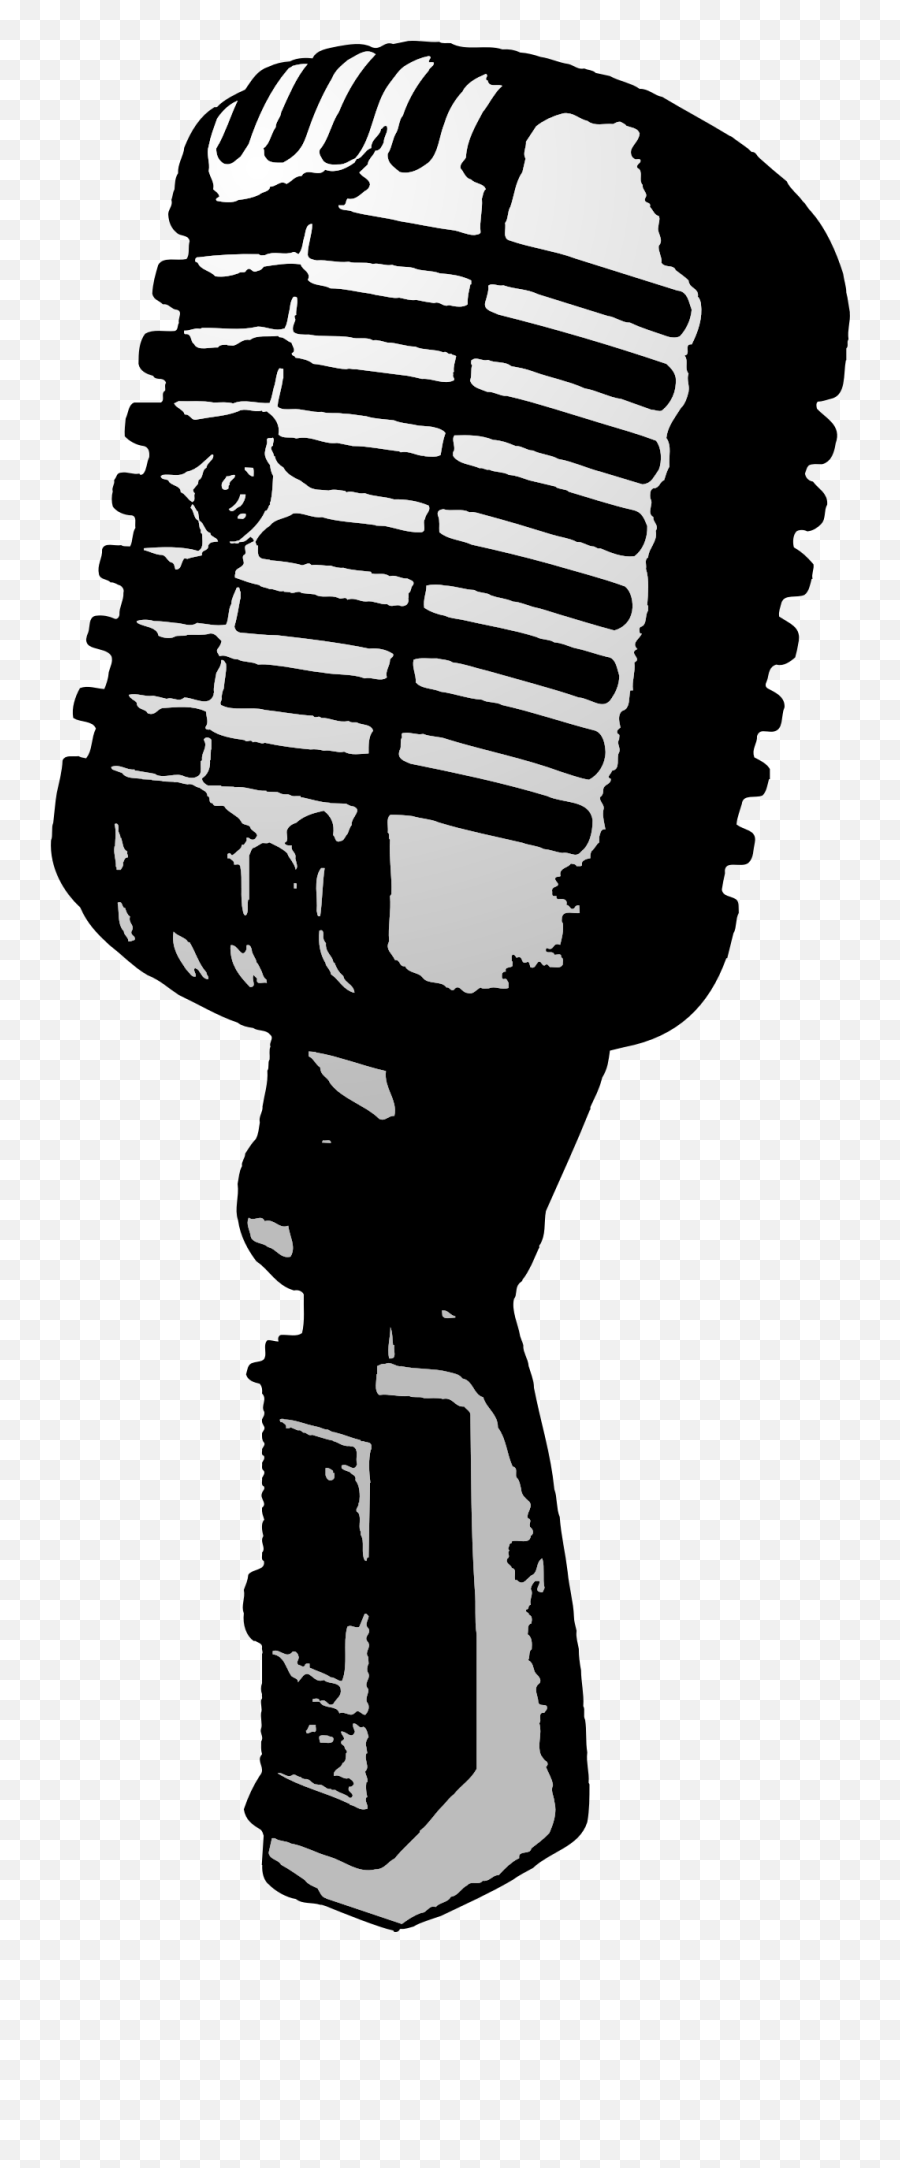 Old Time Microphone Png - Old Microphone Clipart,Microphone Clipart Png